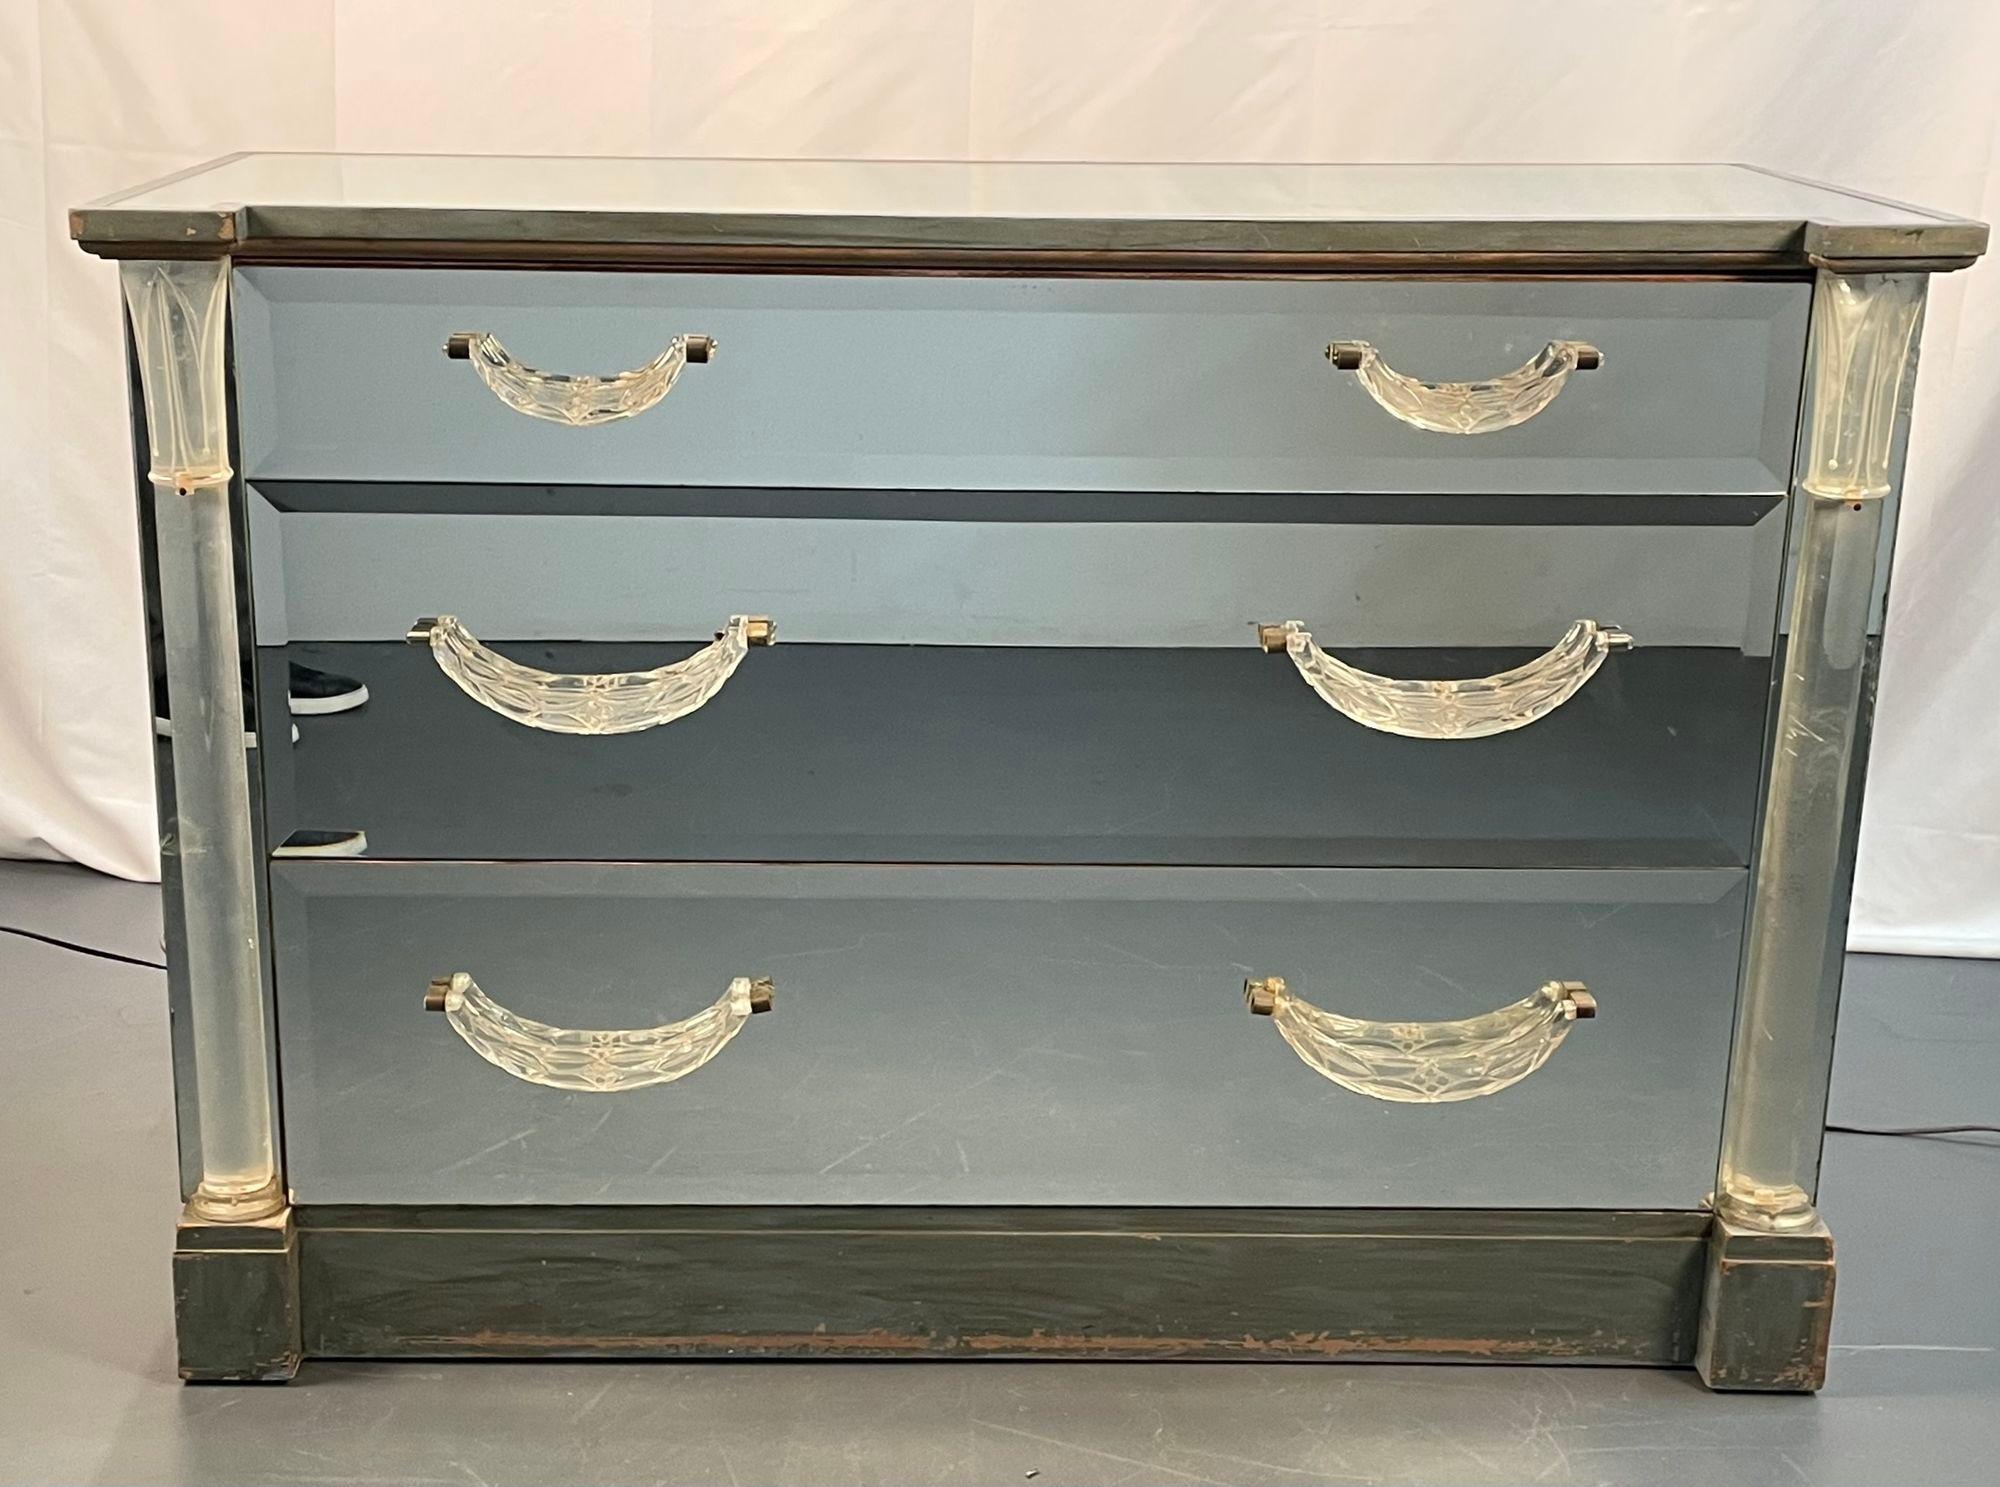 Mid-Century Modern Mirrored Grosfeld House Cabinet / Commode, Glassics, 1930s, Original Paint Finish
 
A rare and important original paint finish signed GROSFELD HOUSE mirrored commode or cabinet. A stunning Mid-Century Modern cabinet from the